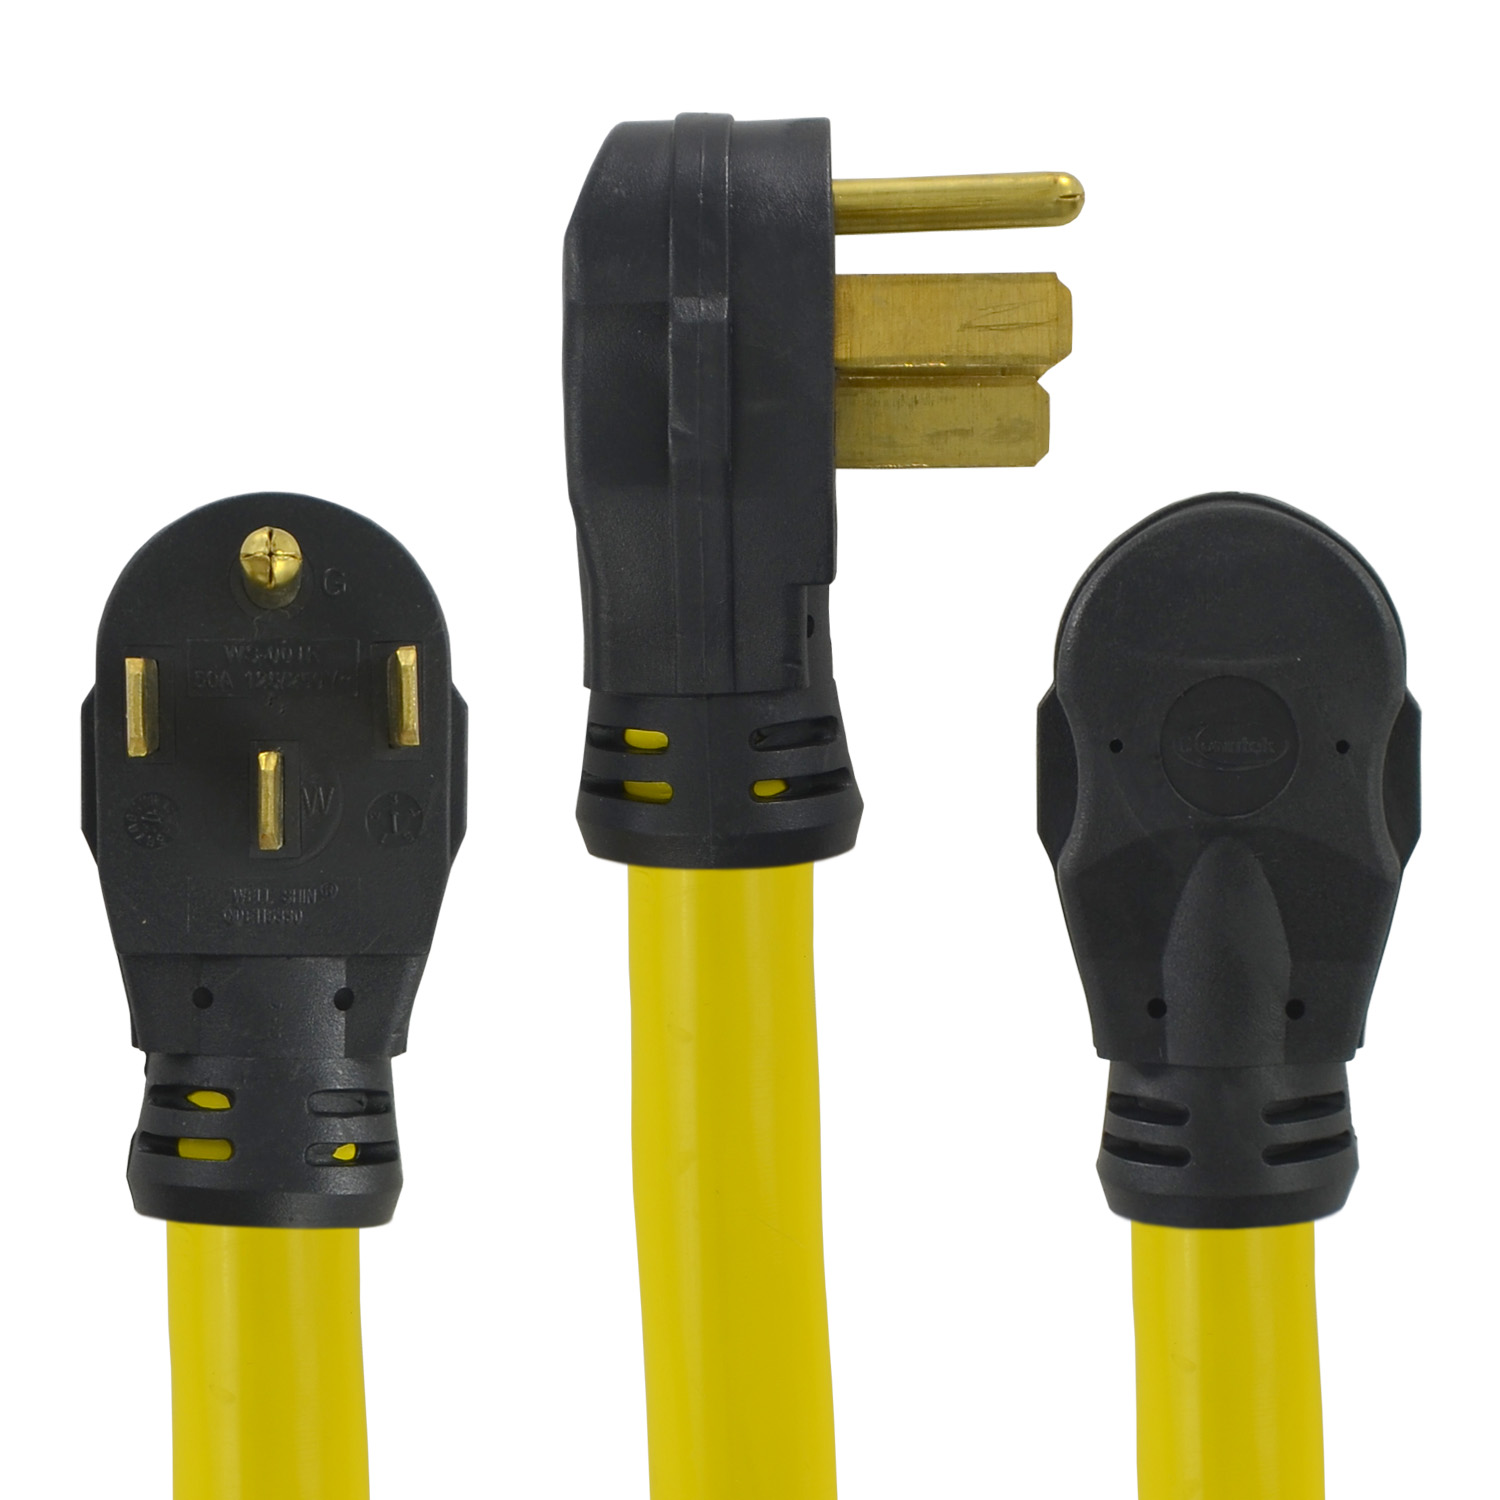 3ft 10-14 AWG 7-Way Trailer Plug Extension Cable